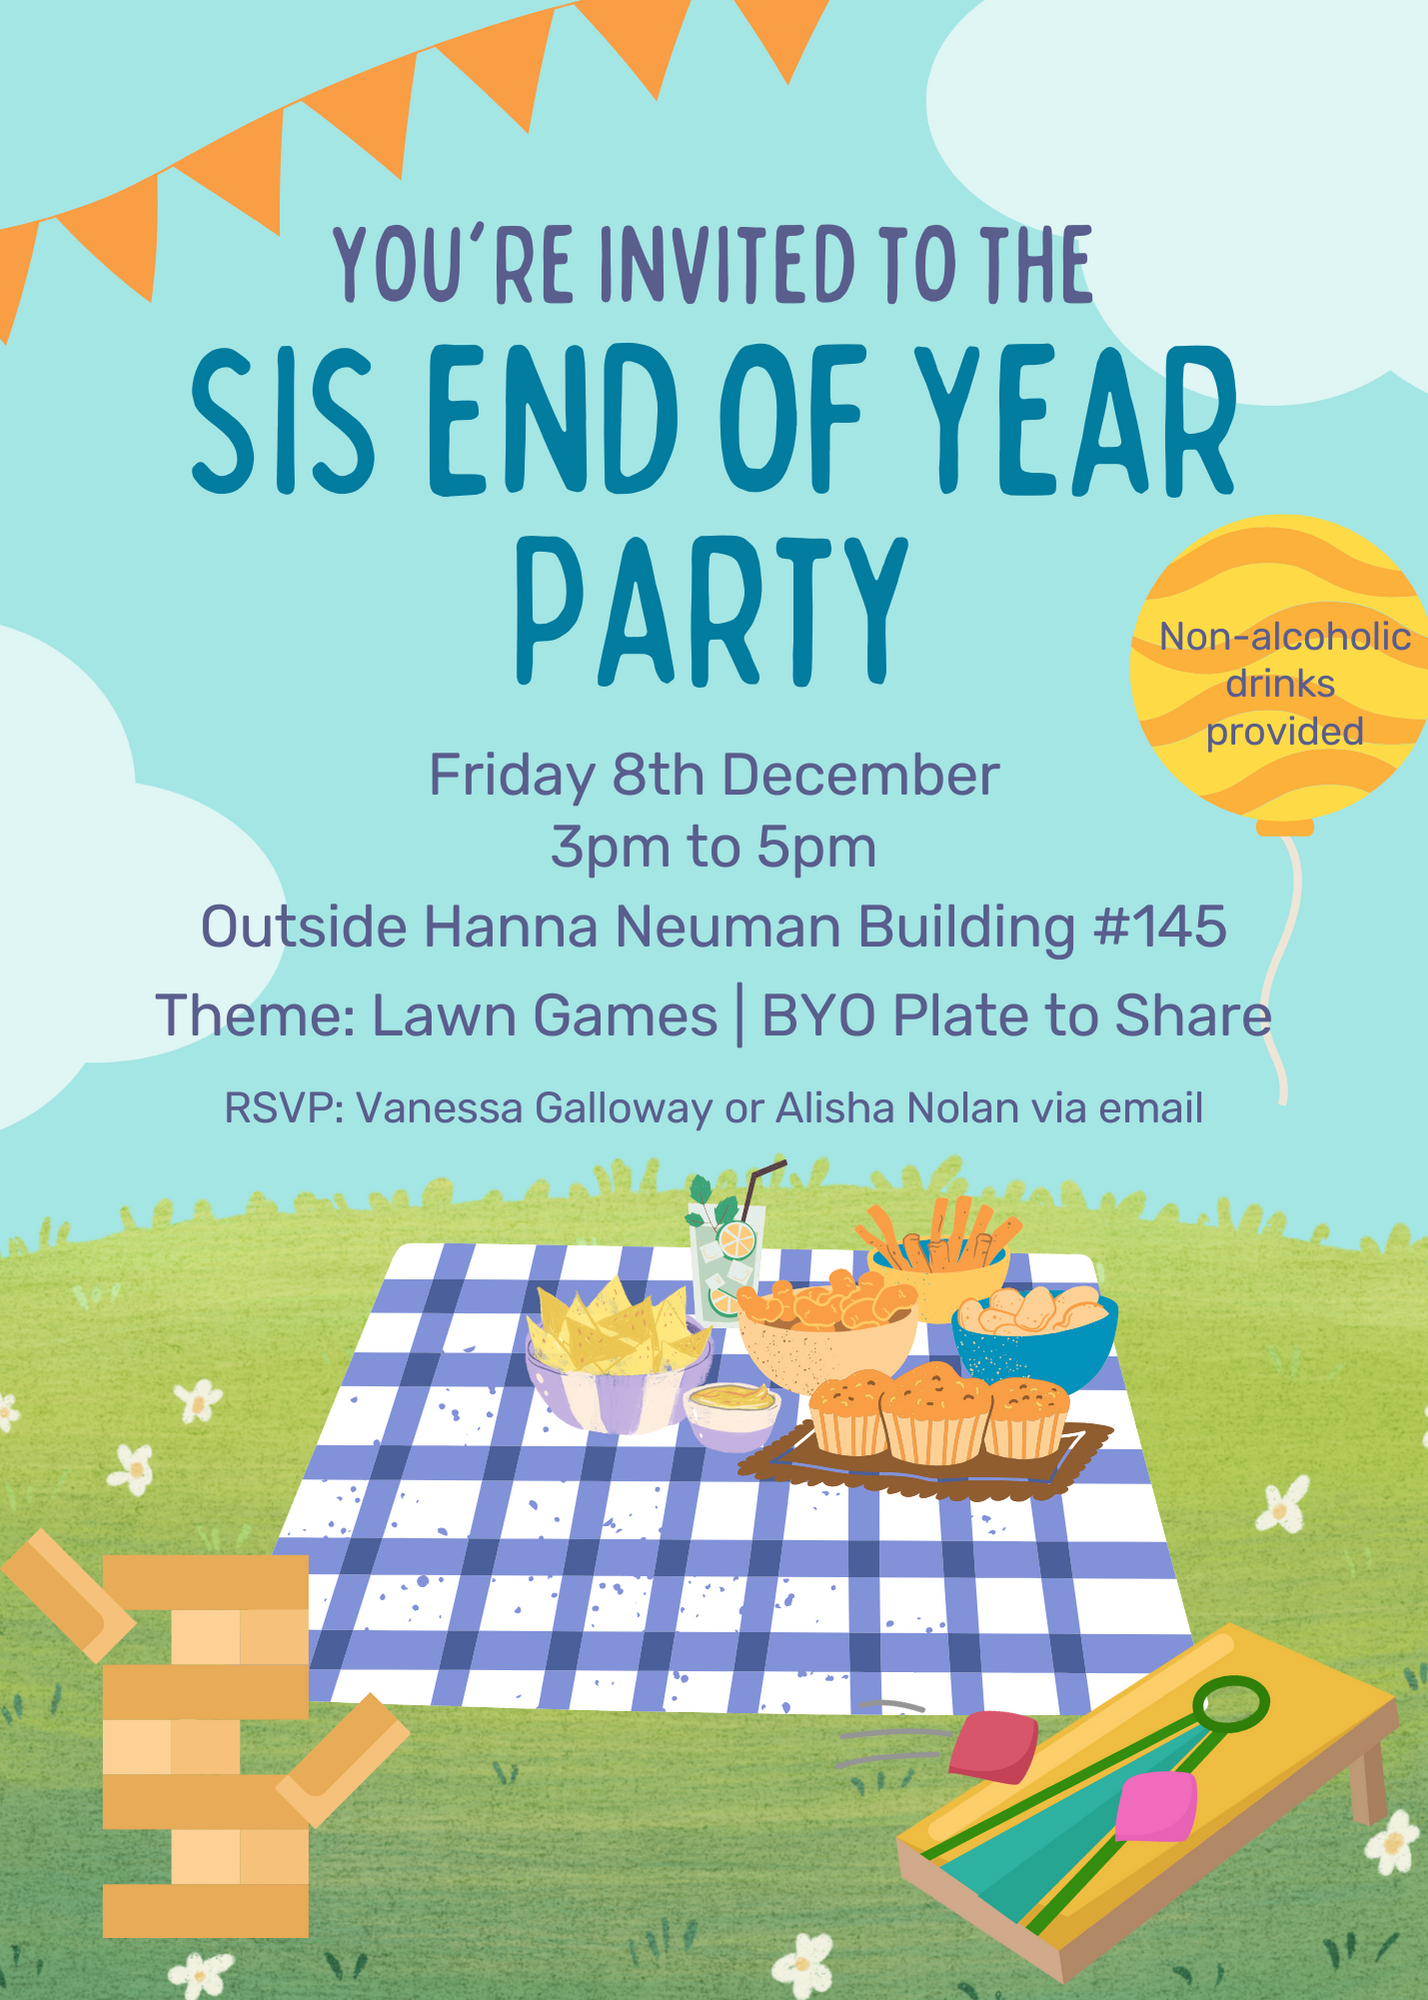 Text reads:
You're invited to the SIS End of Year Party. Friday 8 December, 3pm to 5pm. Outside the Hanna Neiman Building #145.
Theme: lawn games
BYO plate to share
Non-alcoholic drinks provided
RSVP: Vanessa Galloway or Alisha Nolan via email